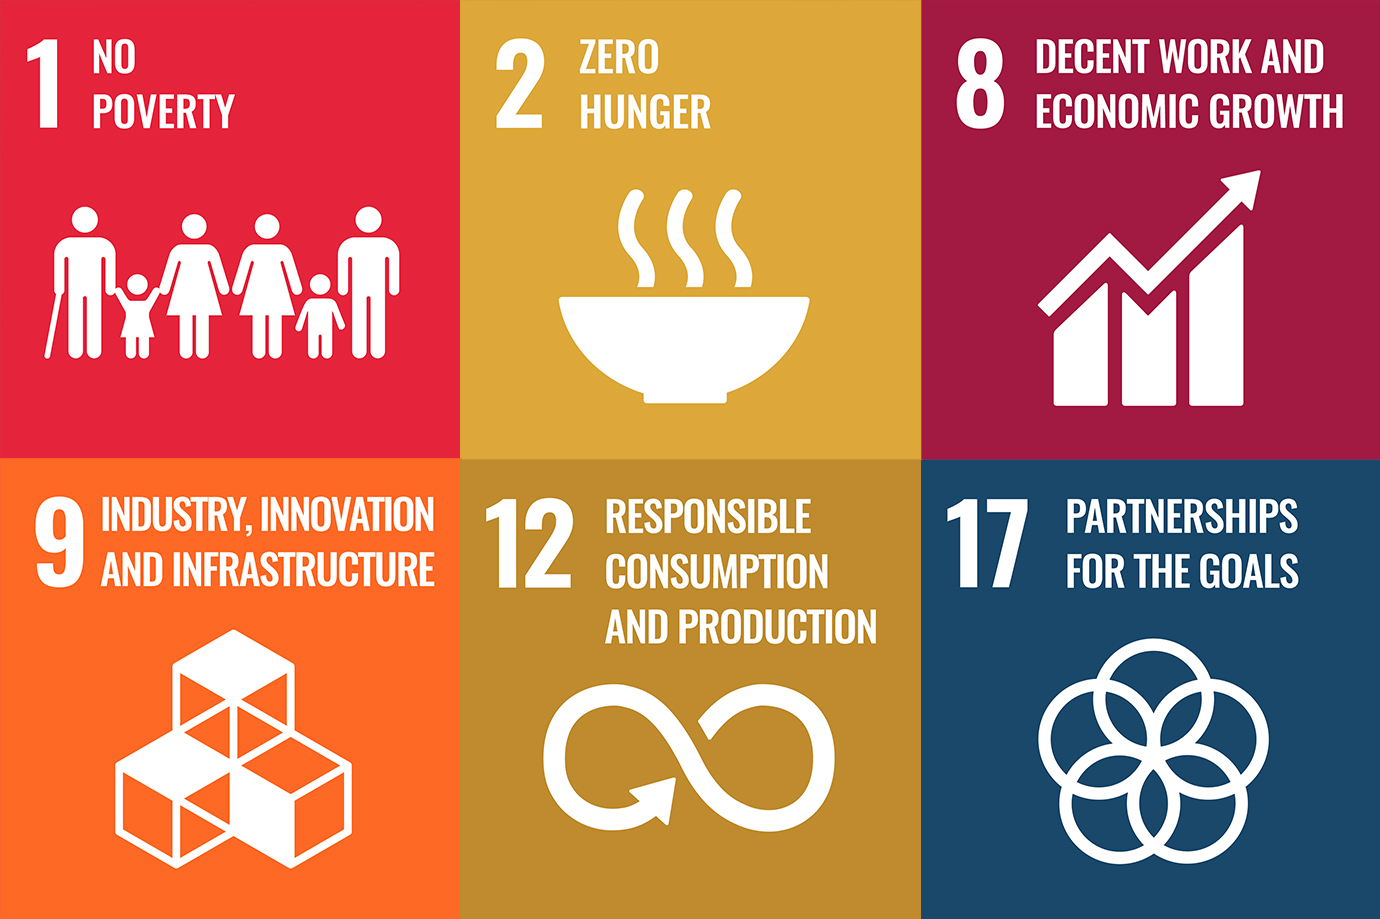 Six of the UN SDG Goals; no poverty, zero hunger, decent work and economic growth, industry, innovation and infrastructure, responsible consumption and production, partnerships for the goals.